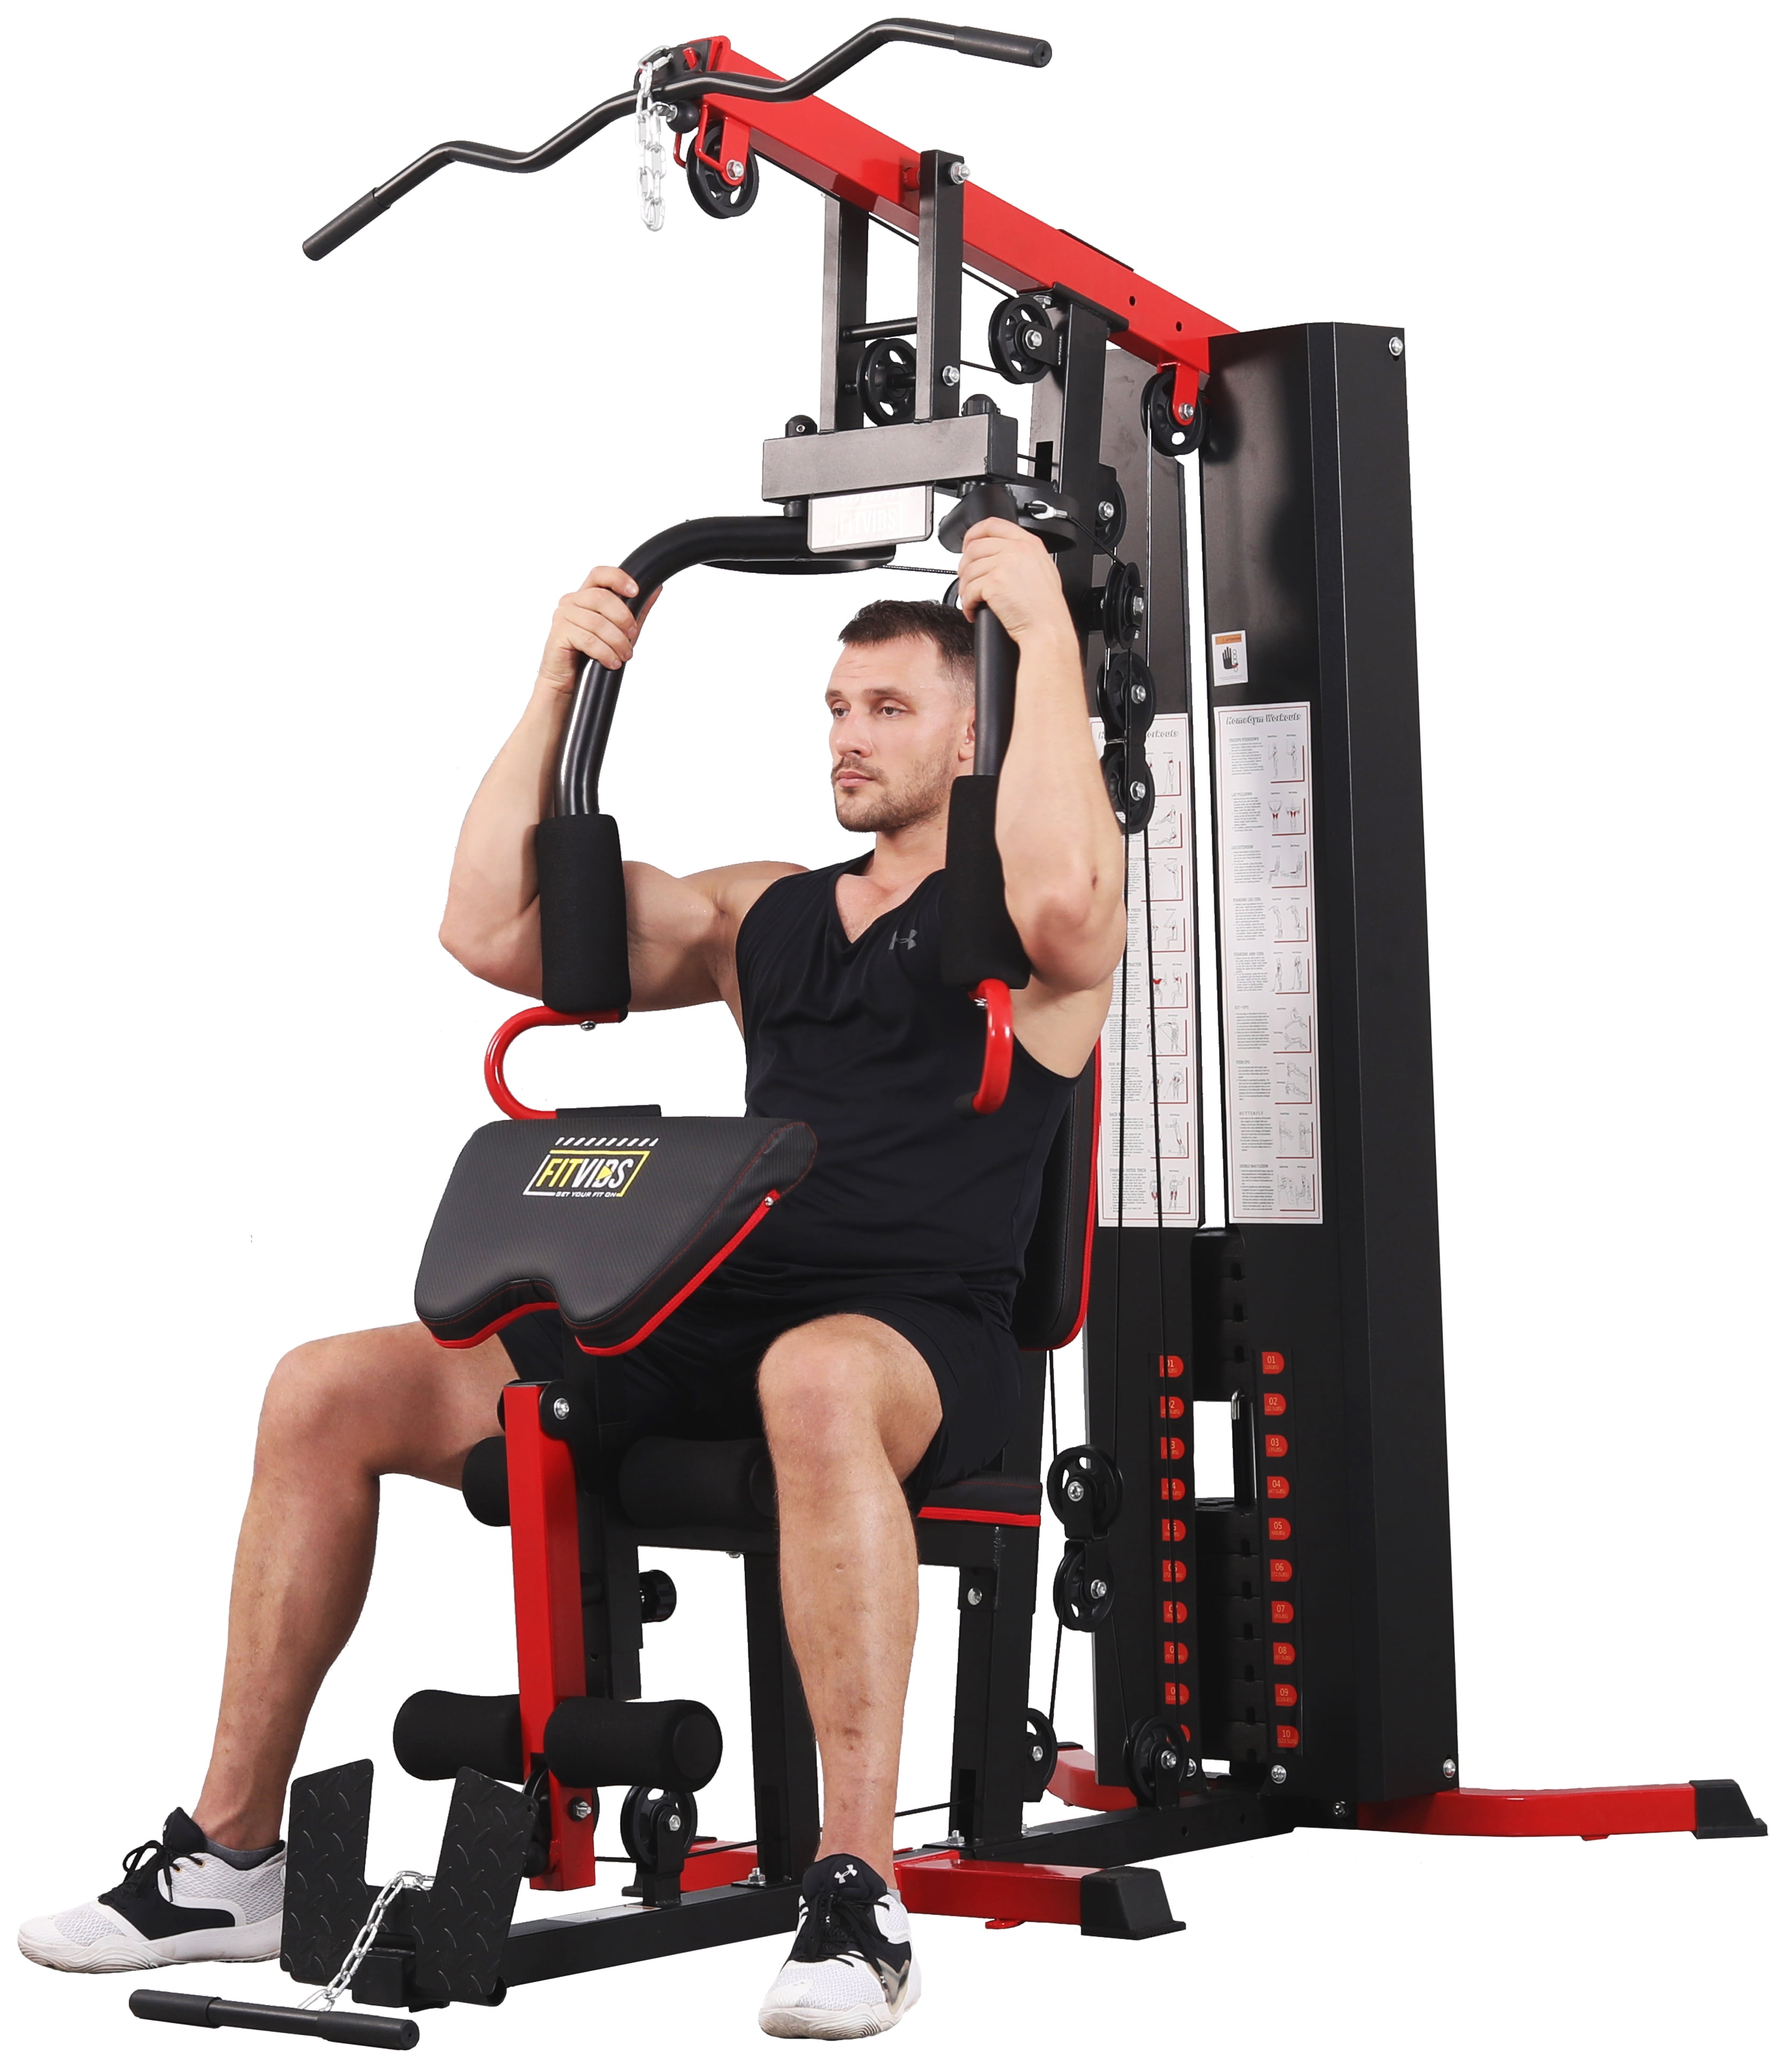 Fitvids LX750 Home Gym System Workout Station with 330 Lbs of Resistance, 122.5 Lbs Weight Stack